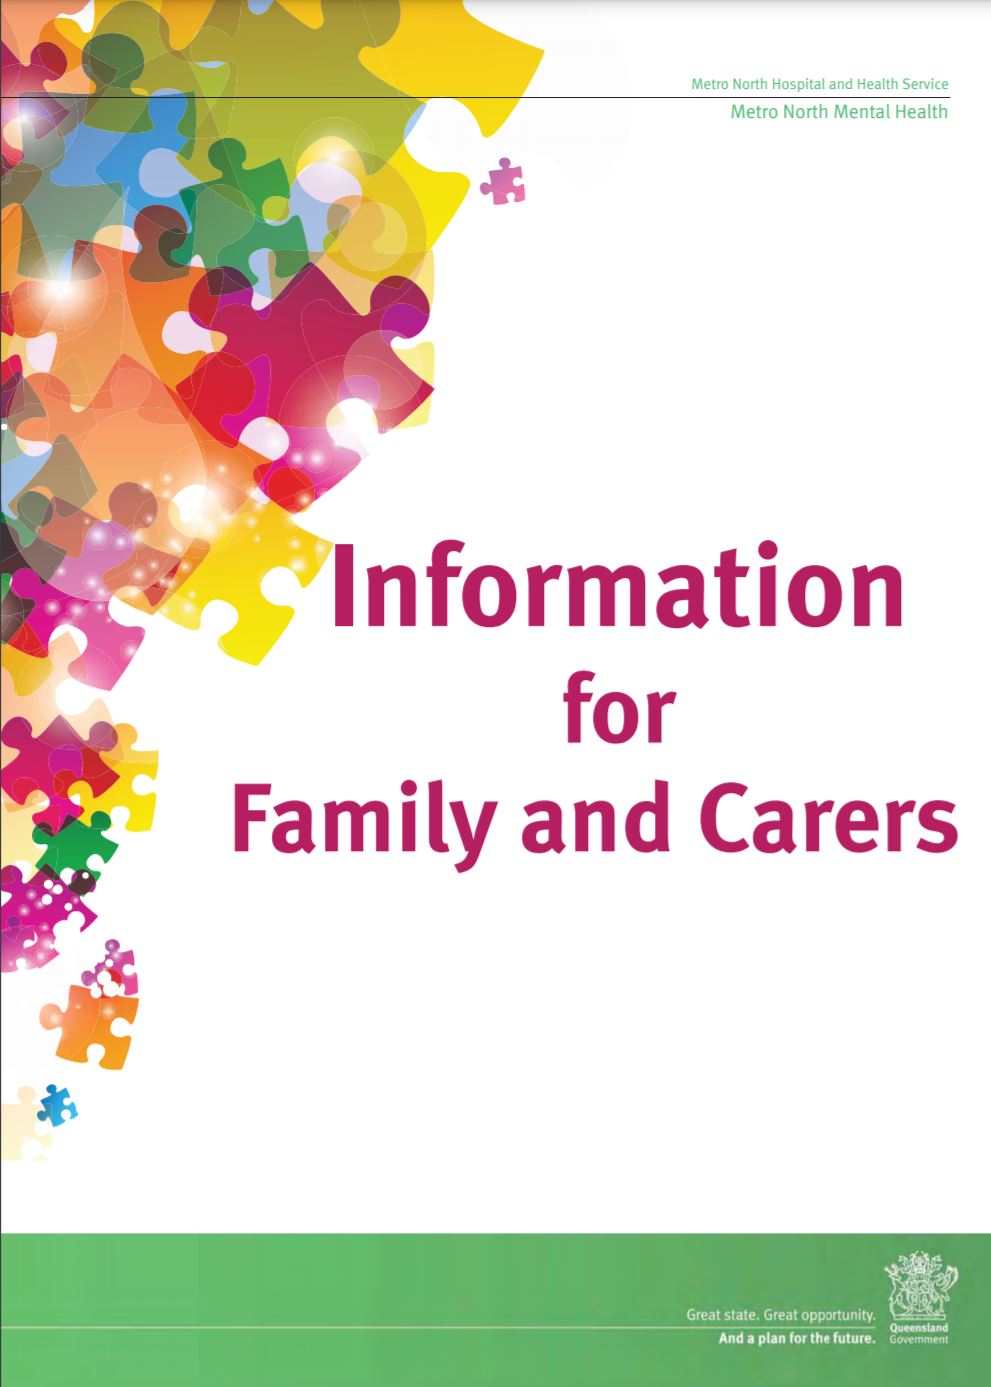 puzzle pieces and text reading "information for family and carers"